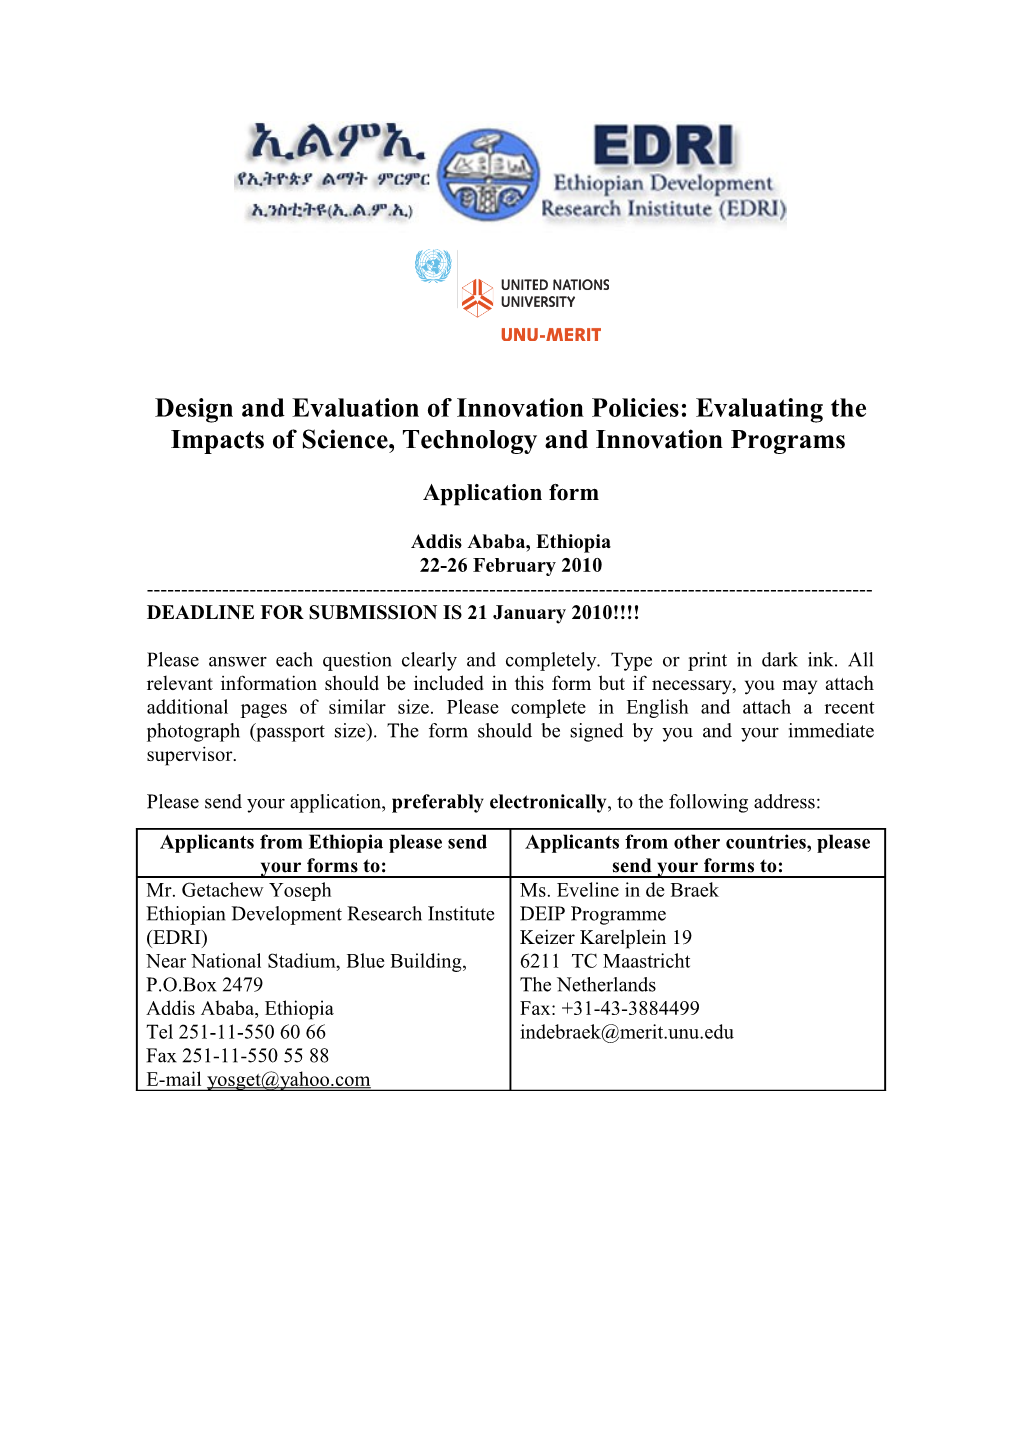 Design and Evaluation of Innovation Policies Application Form